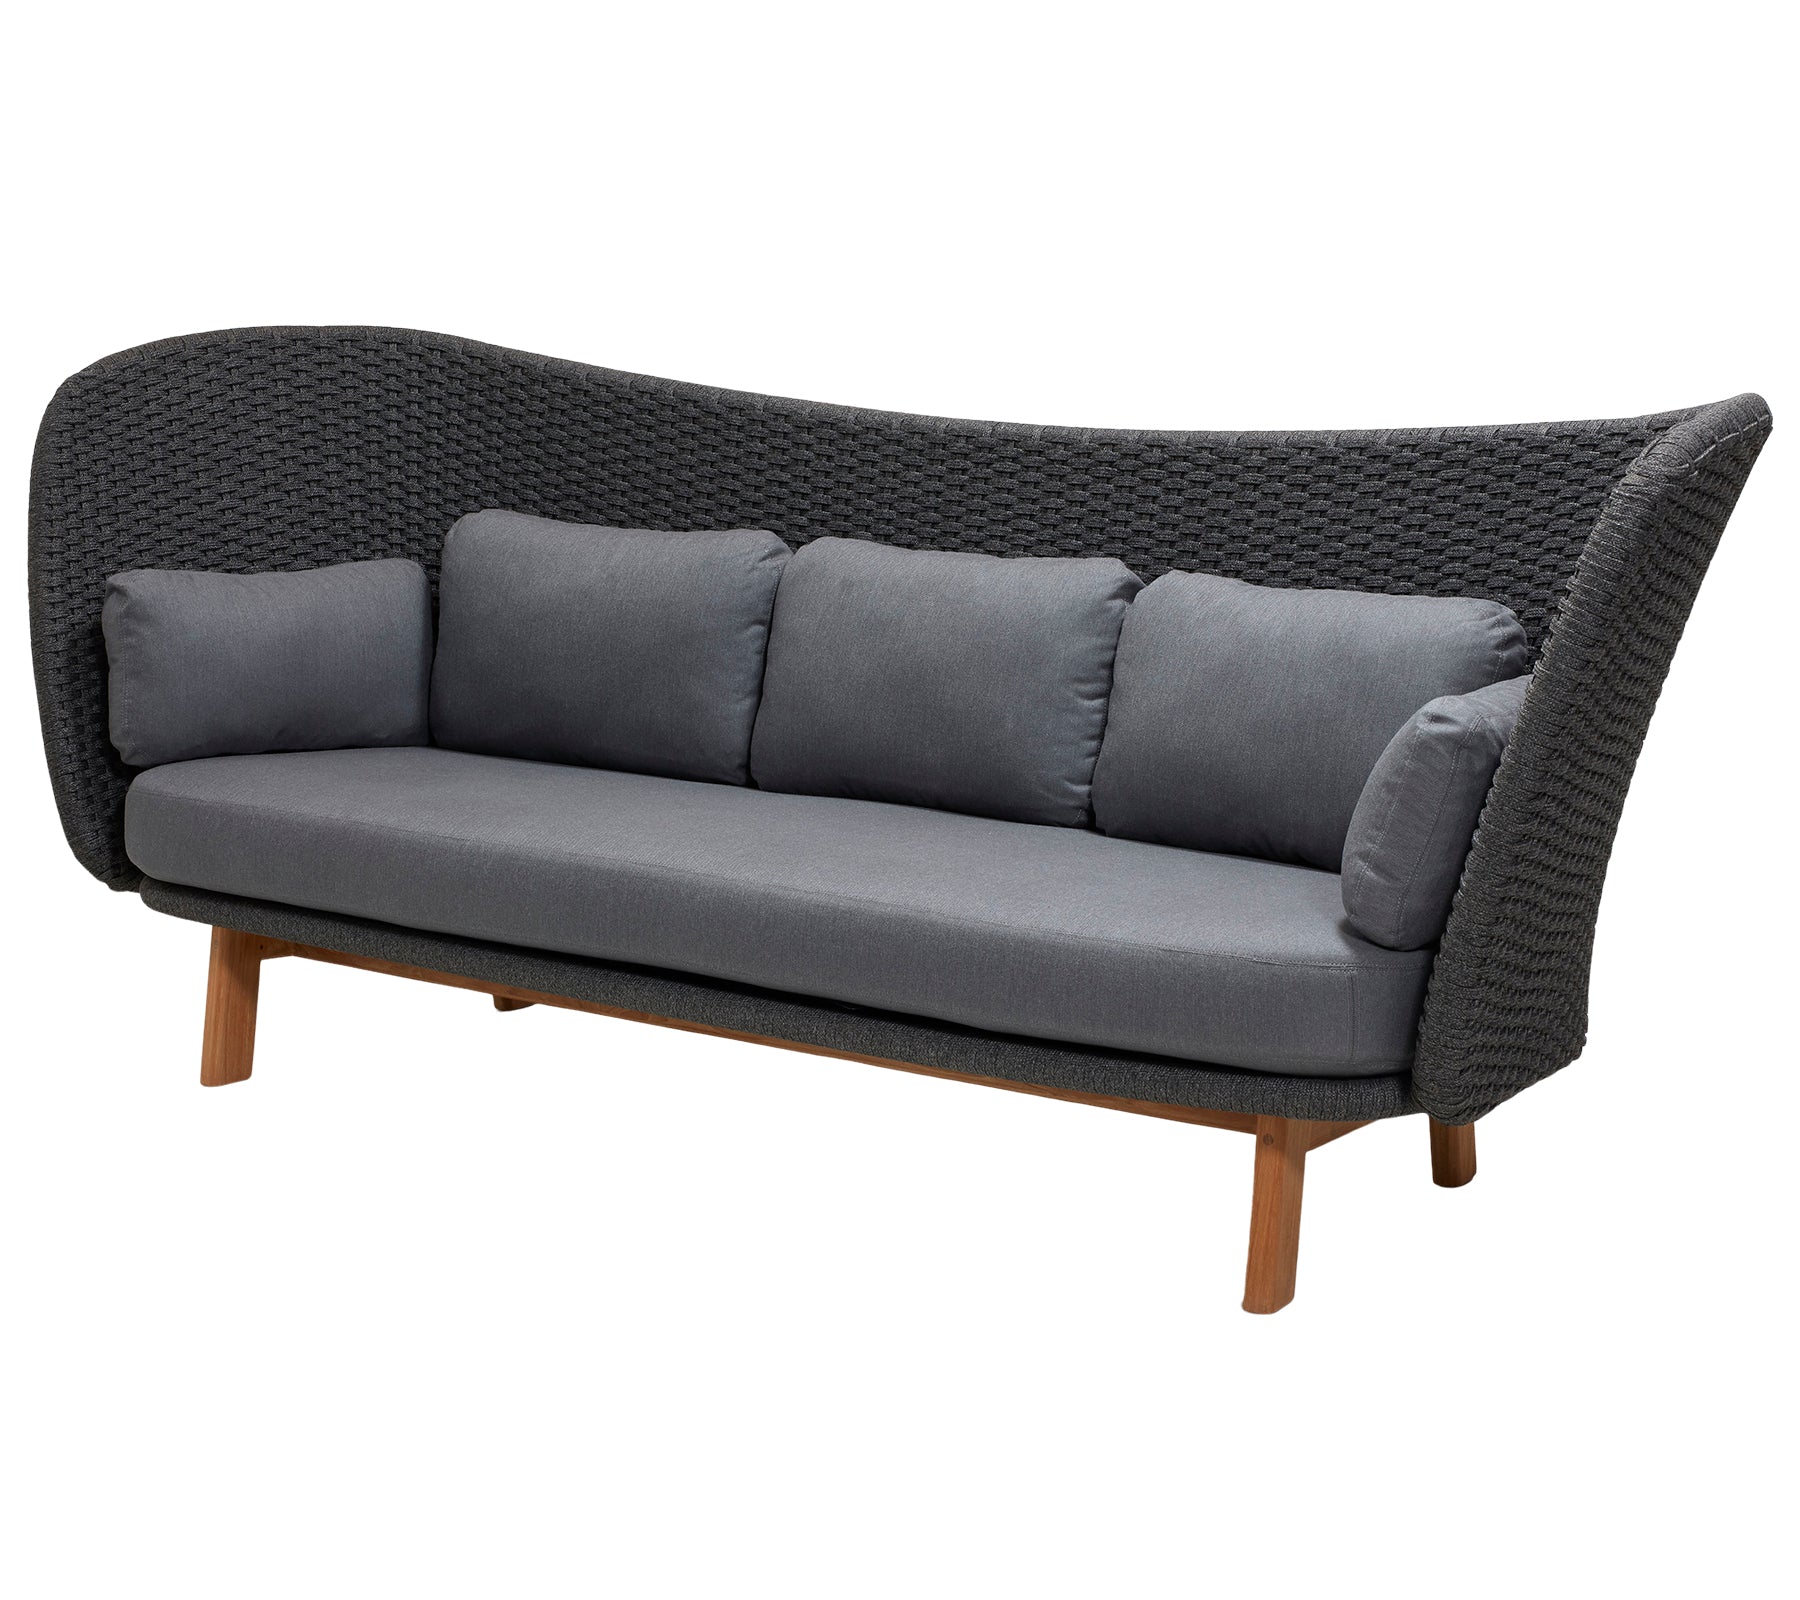 Cane-line Peacock Wing 3-seater Sofa 5560RODGT